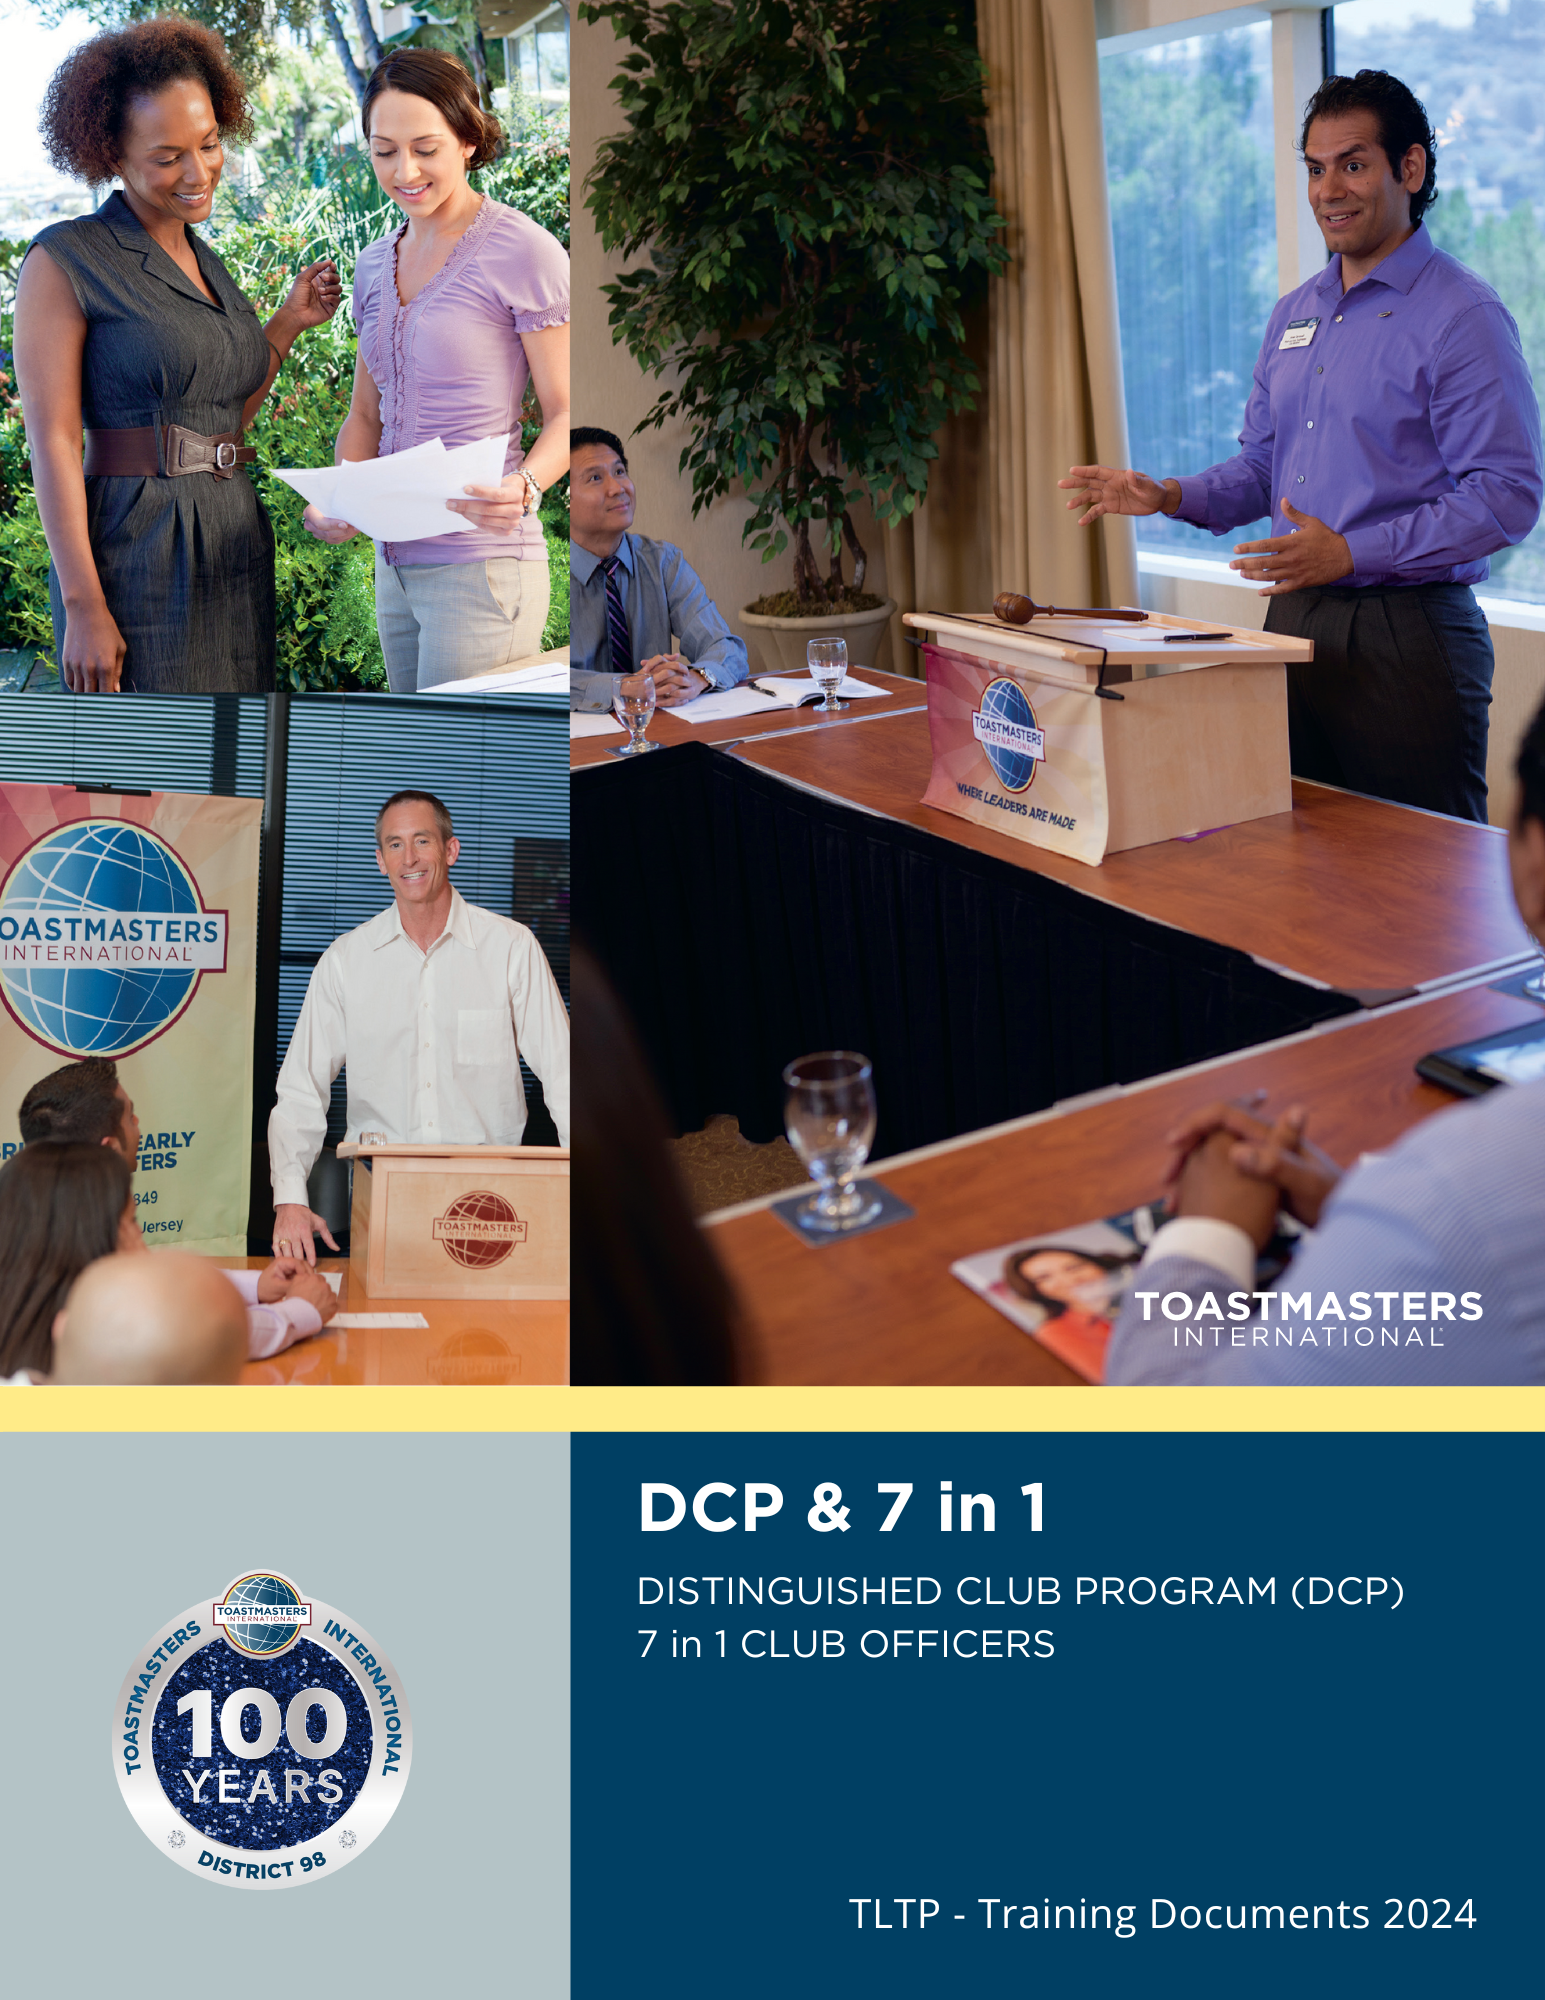 Distinguished Club Program ( DCP ) and 7 in 1 